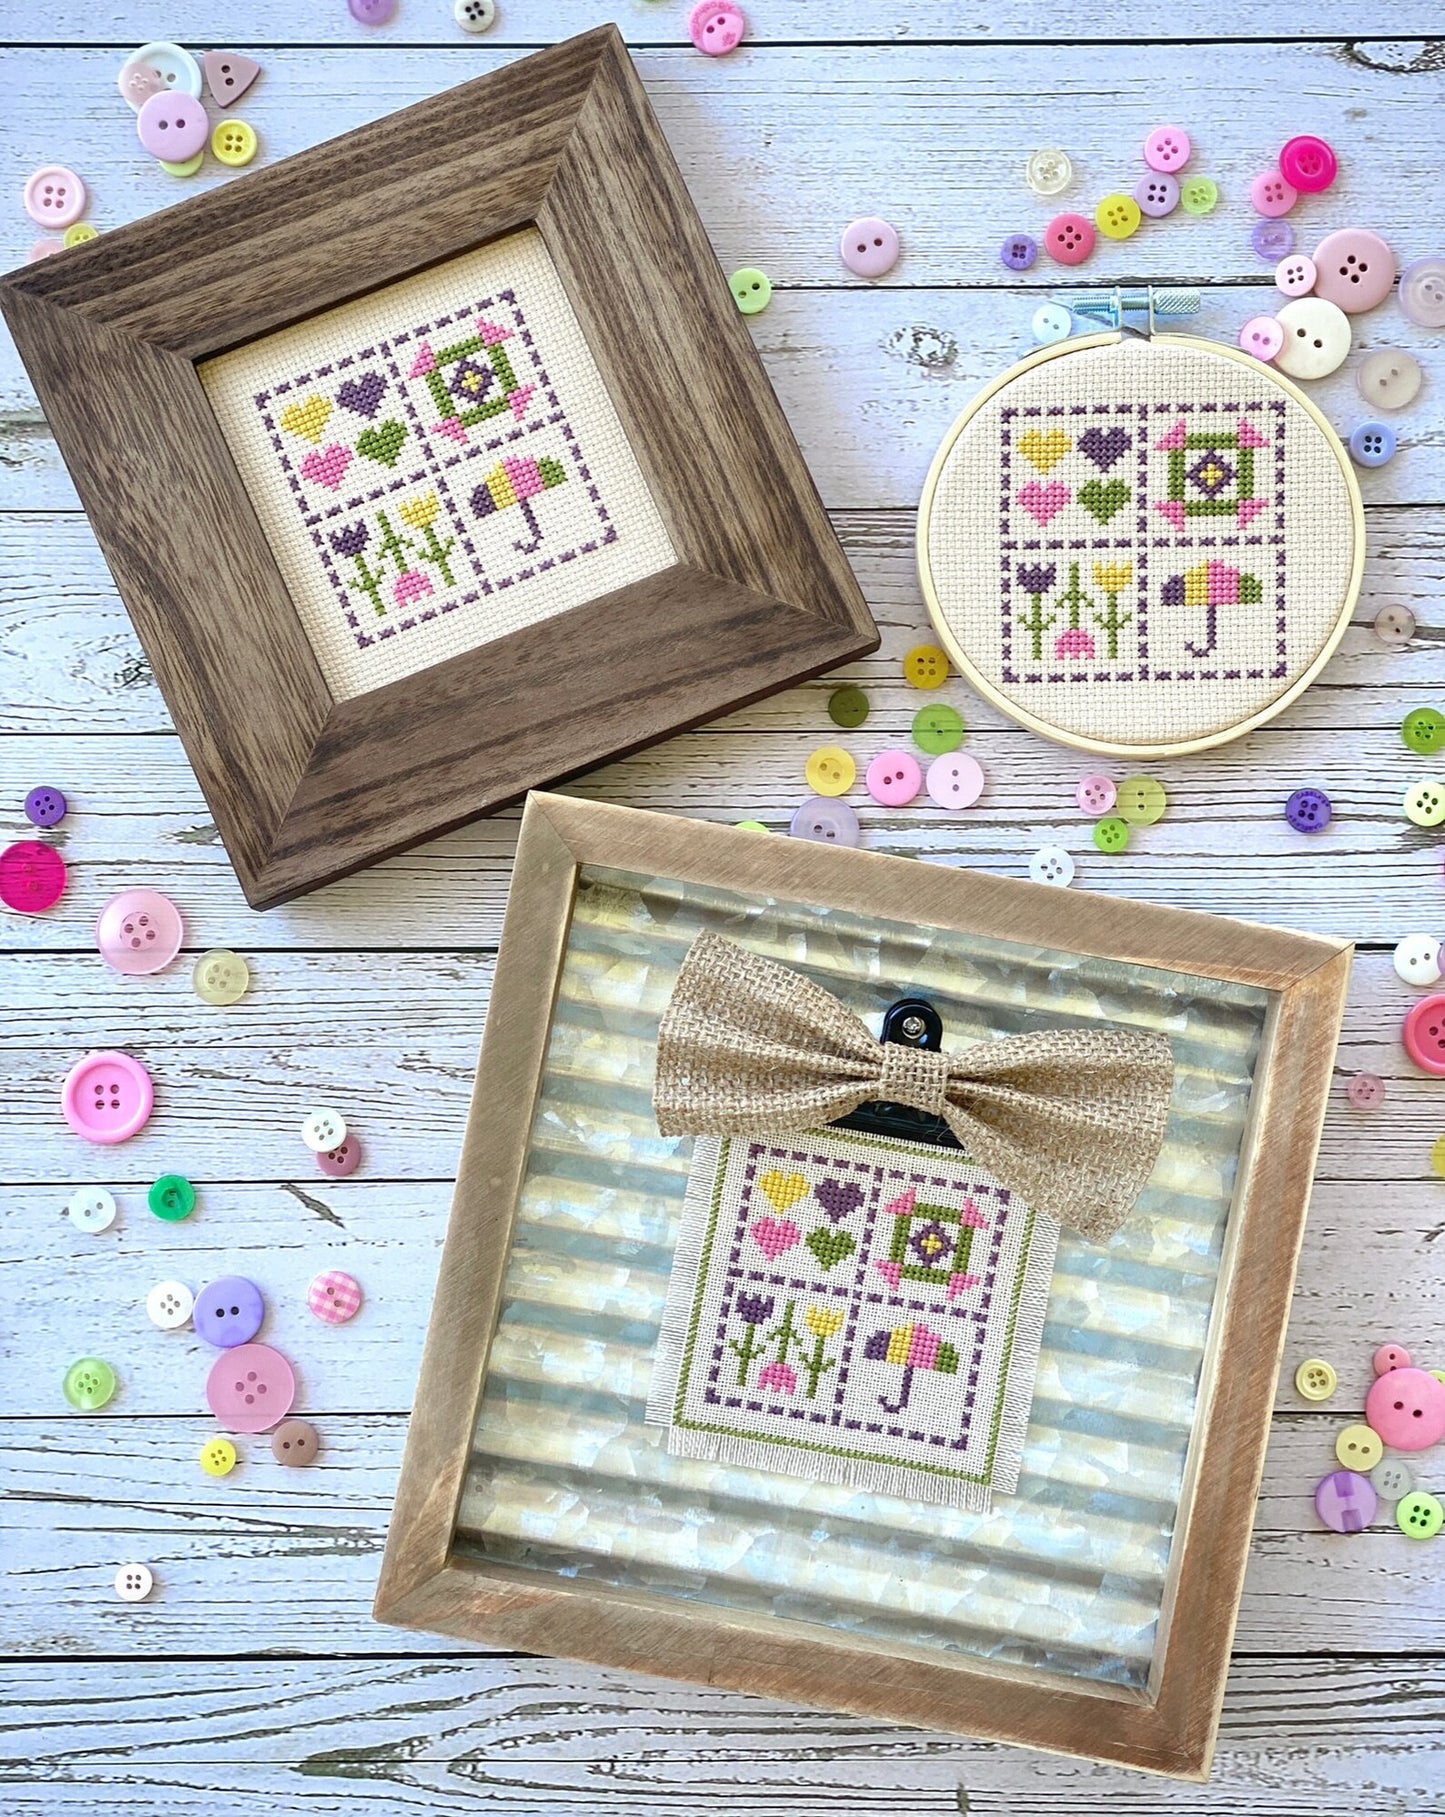 Spring Showers Mini Cross Stitch Pattern by Count Your Stitches Designs